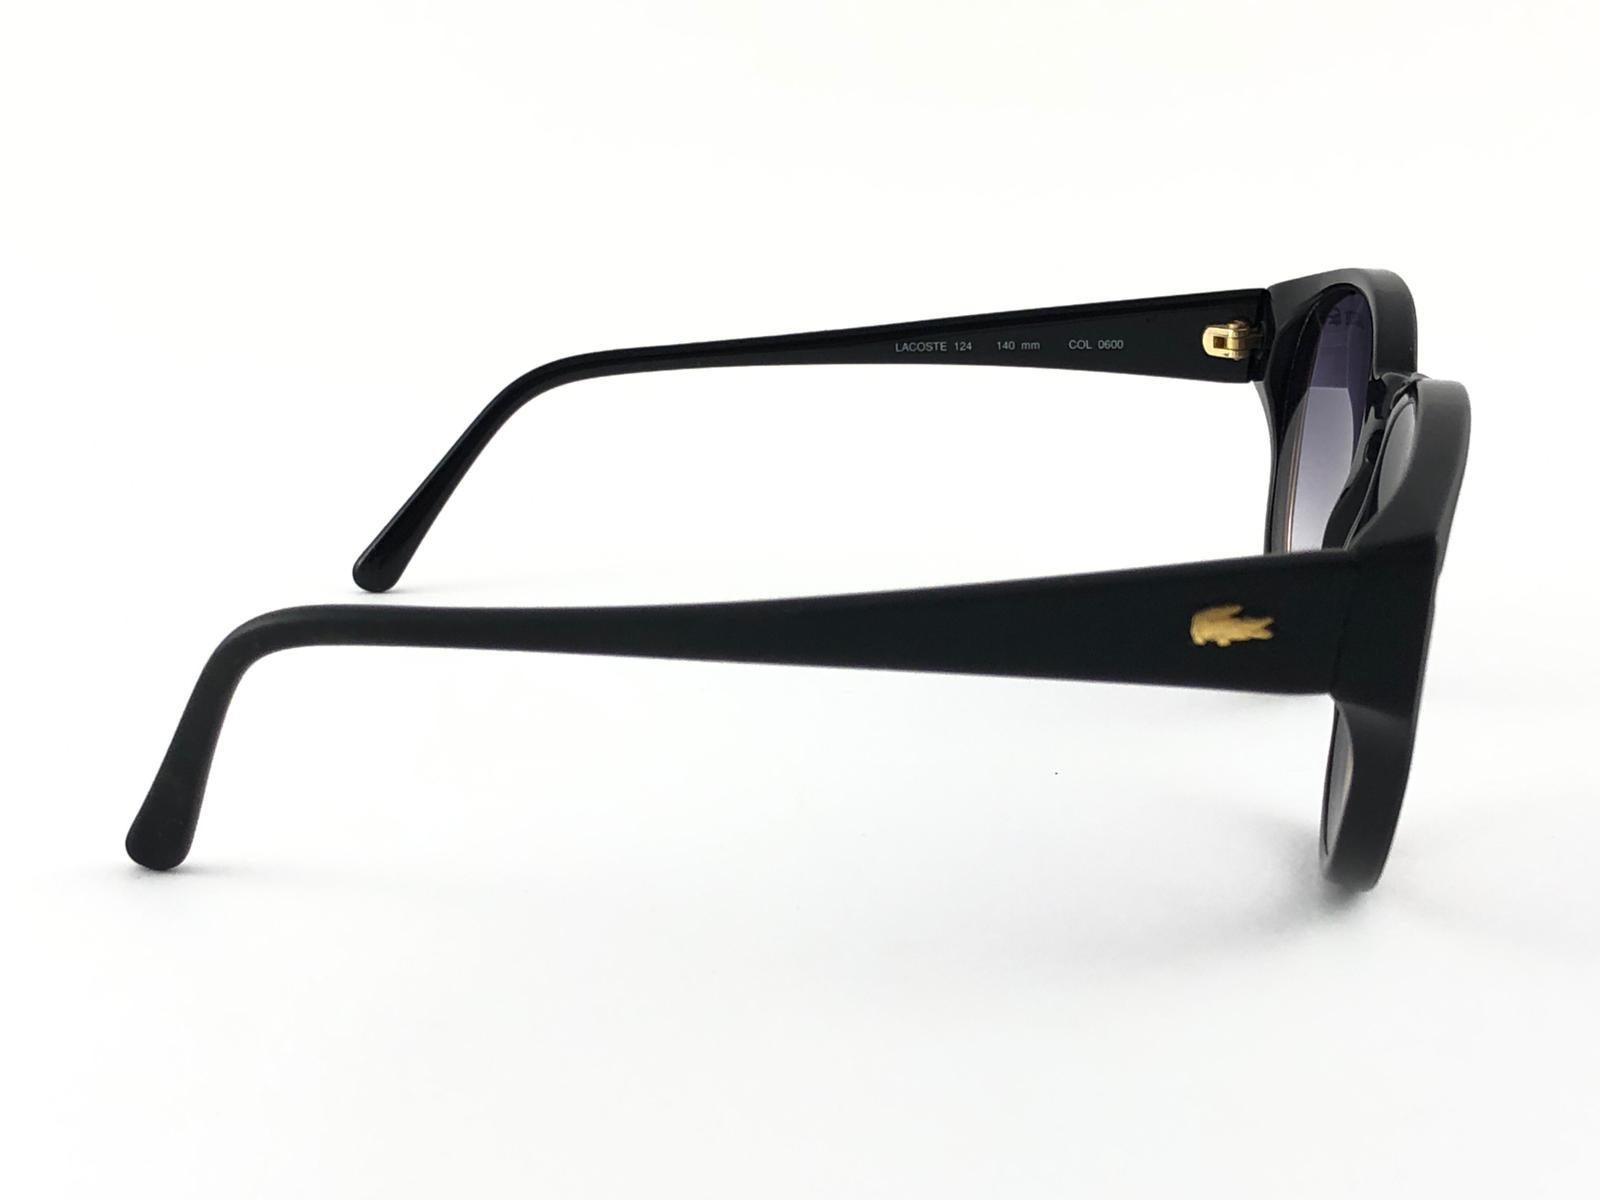 New Vintage Lacoste 124 Black & Gold Accents 1980's Sunglasses Made in France  For Sale 1